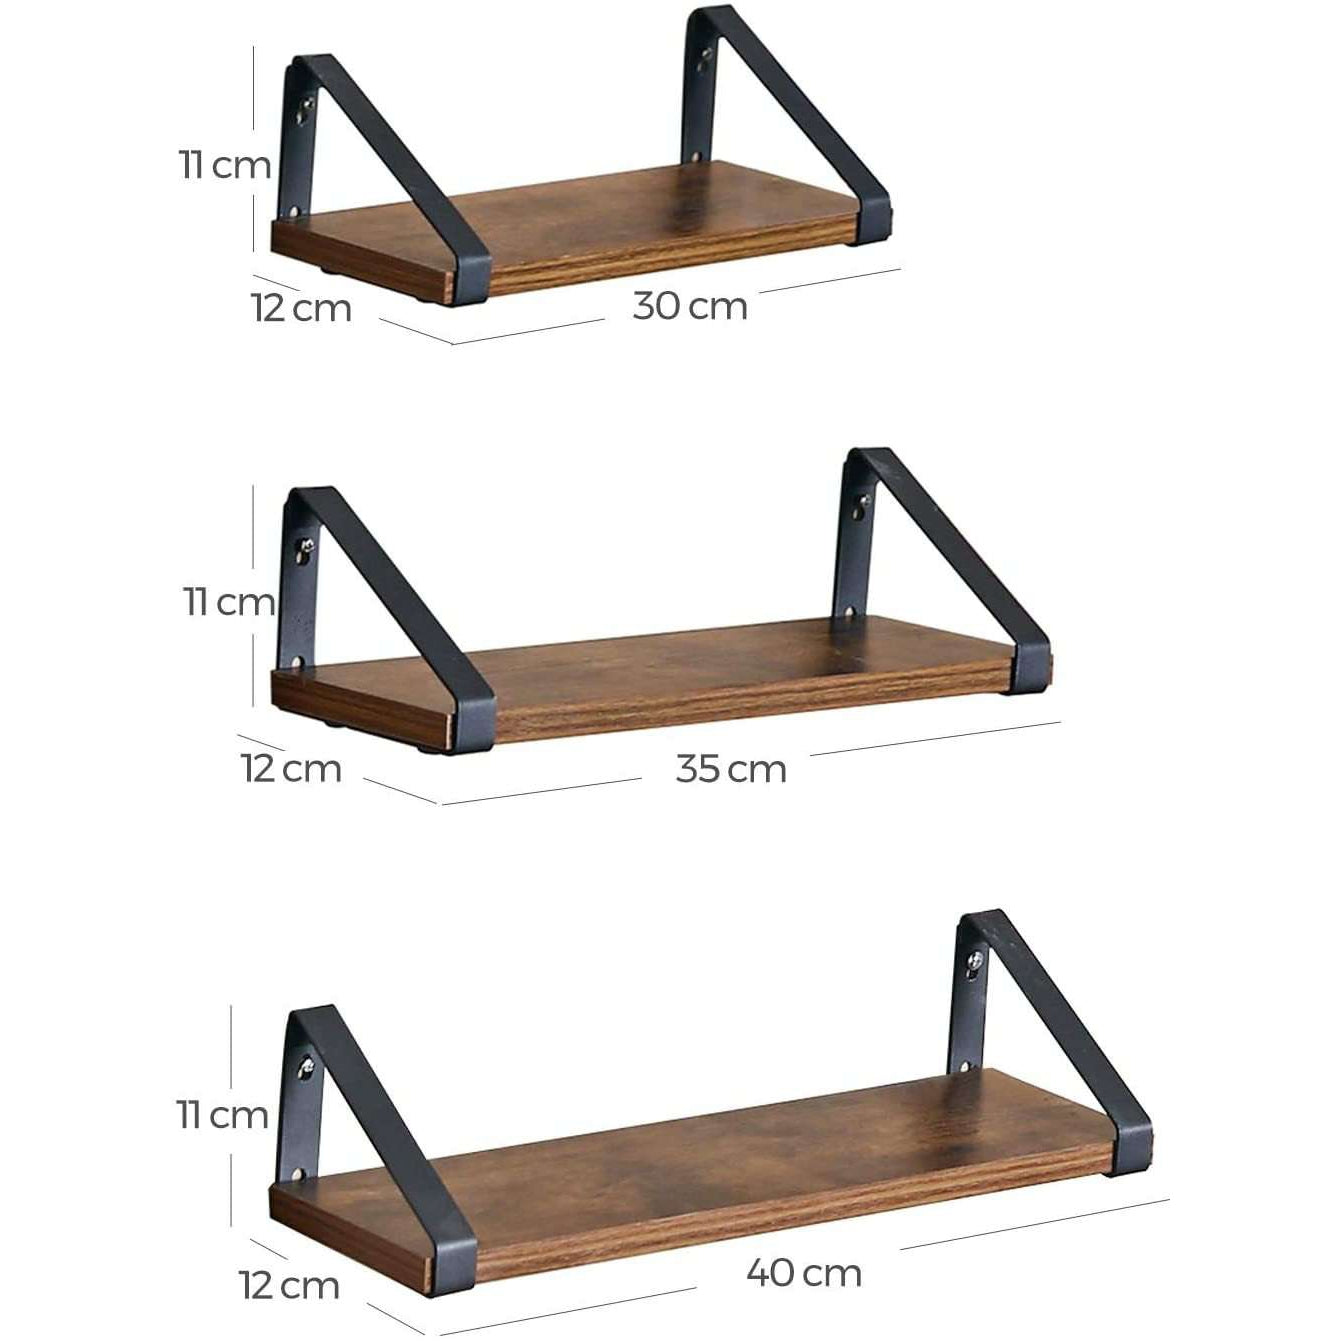 Nancy's Wall Shelf of Industrial Wood - 3 Pieces - Floating - Wall Shelves